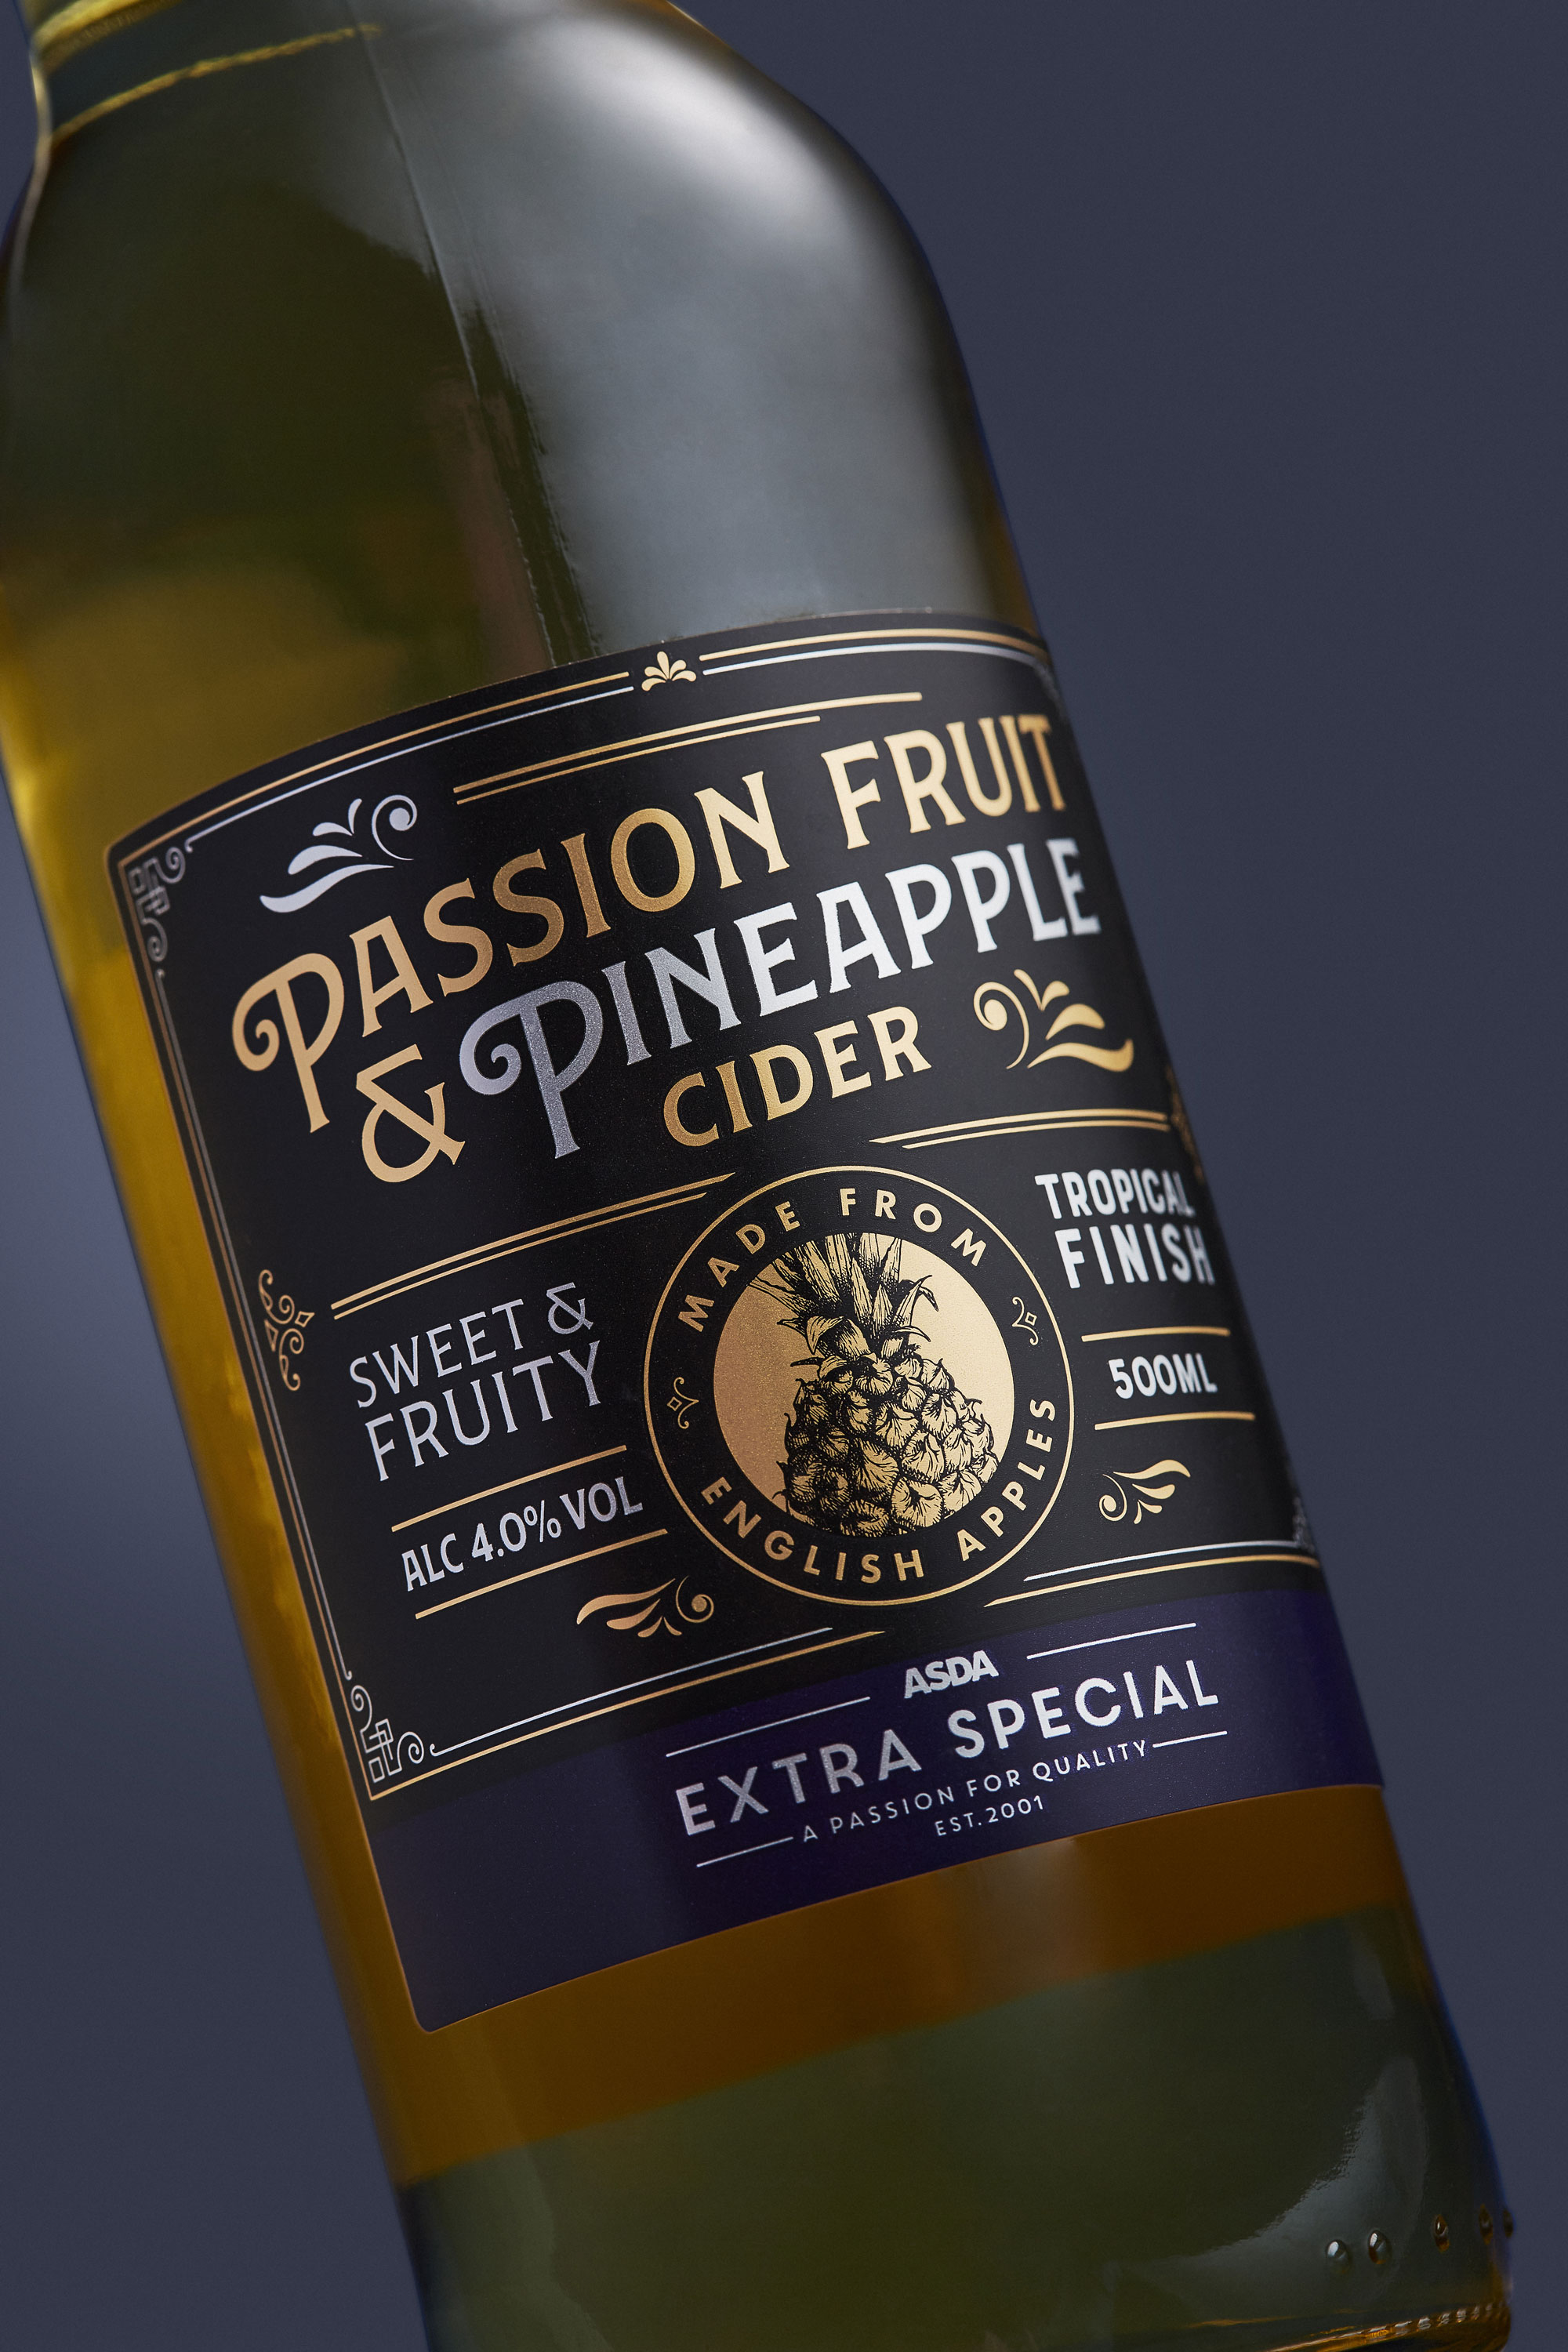 flexo print with dual metallic and matt varnish for asda's extra special ciders